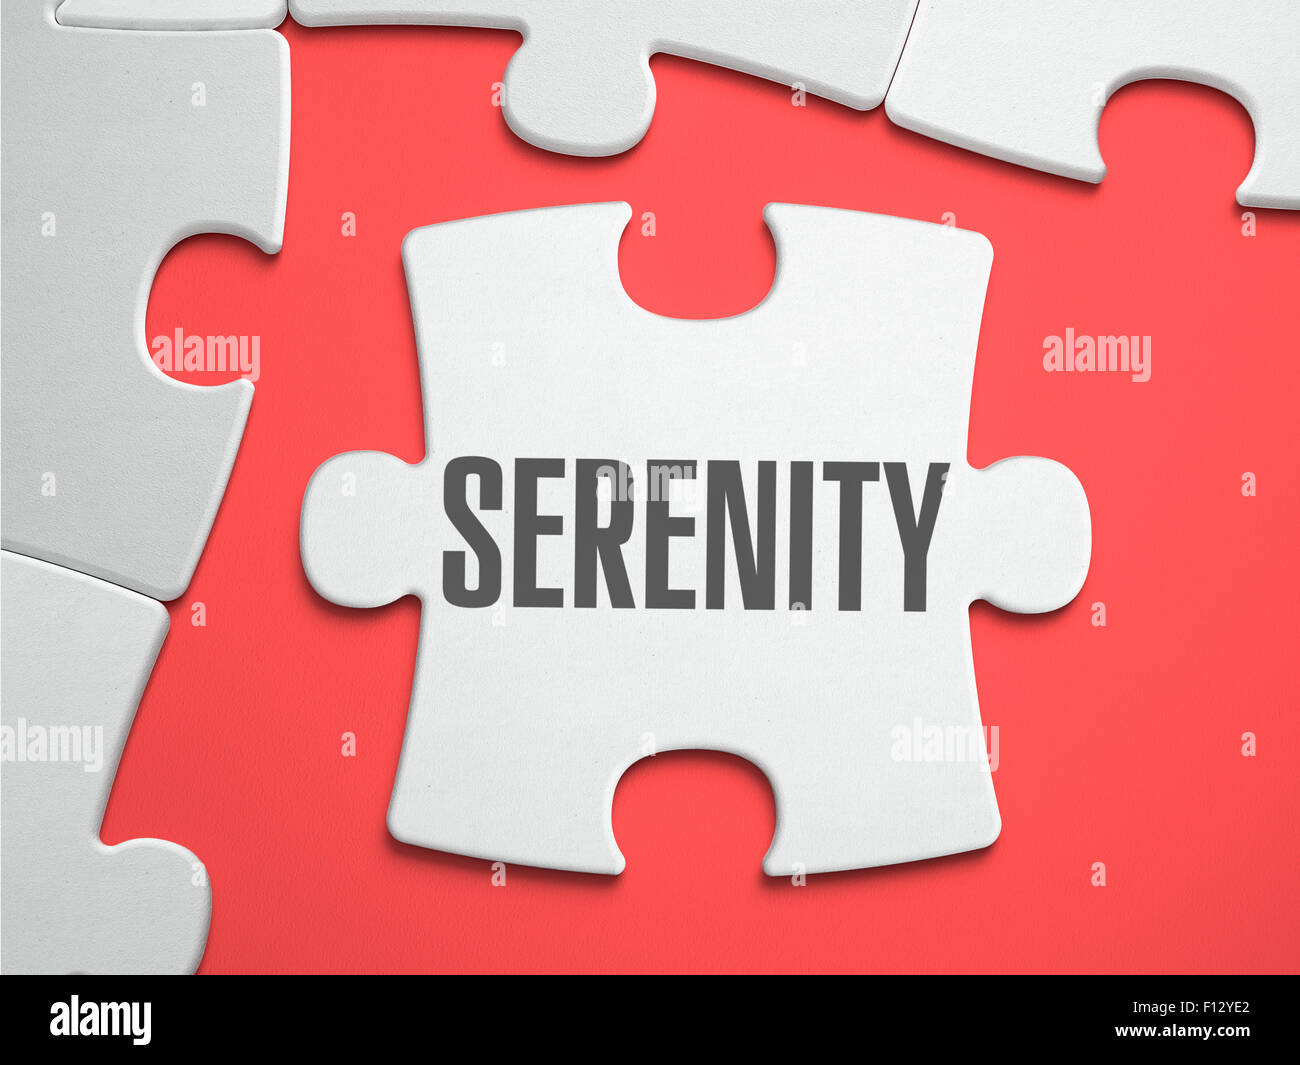 Serenity - Puzzle on the Place of Missing Pieces. Stock Photo